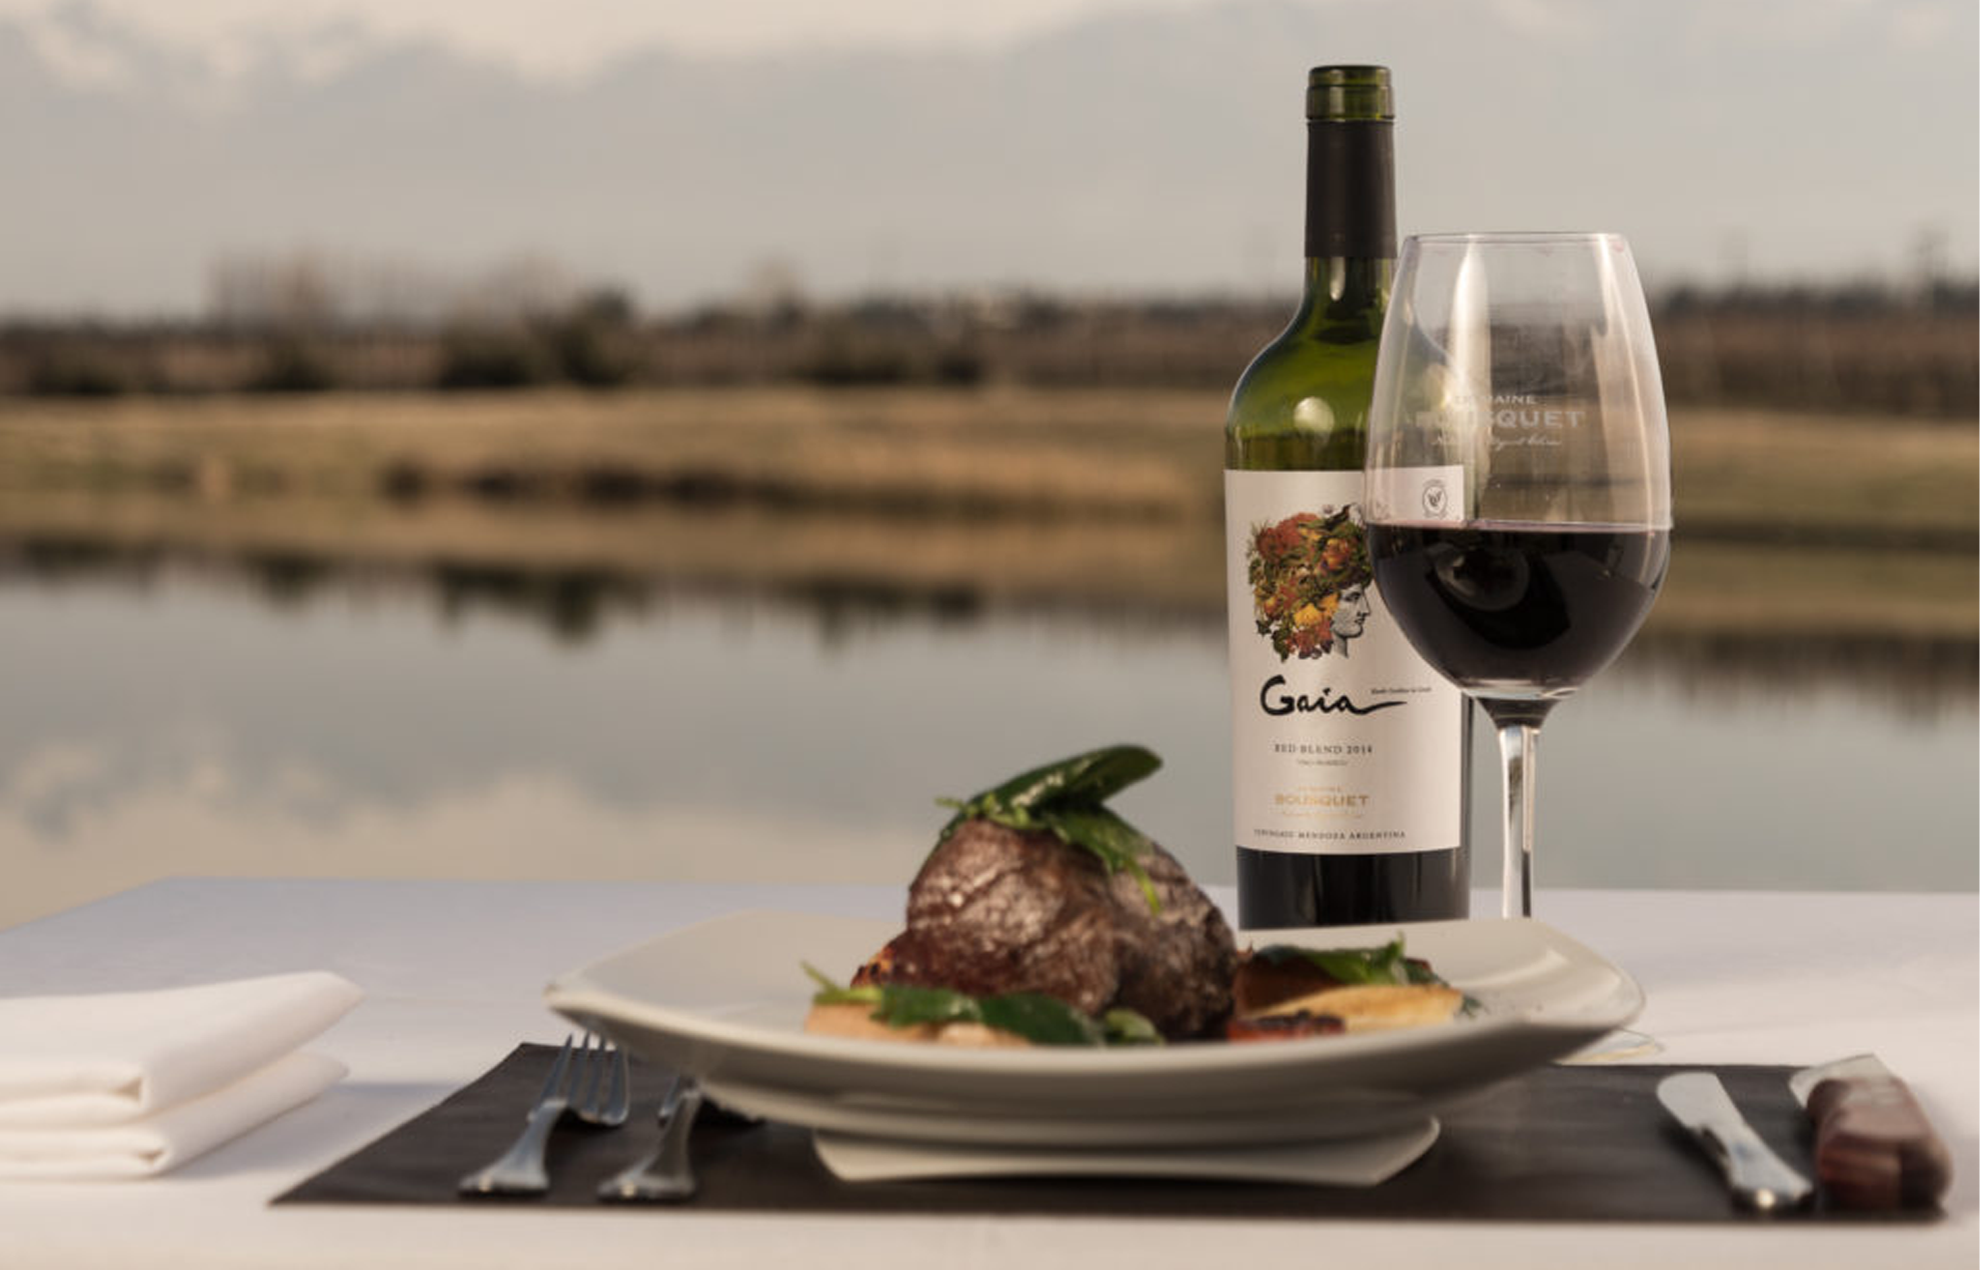 Dinner plate setting with food, a filled wine glass, and a wine bottle, with a landscape view of water.